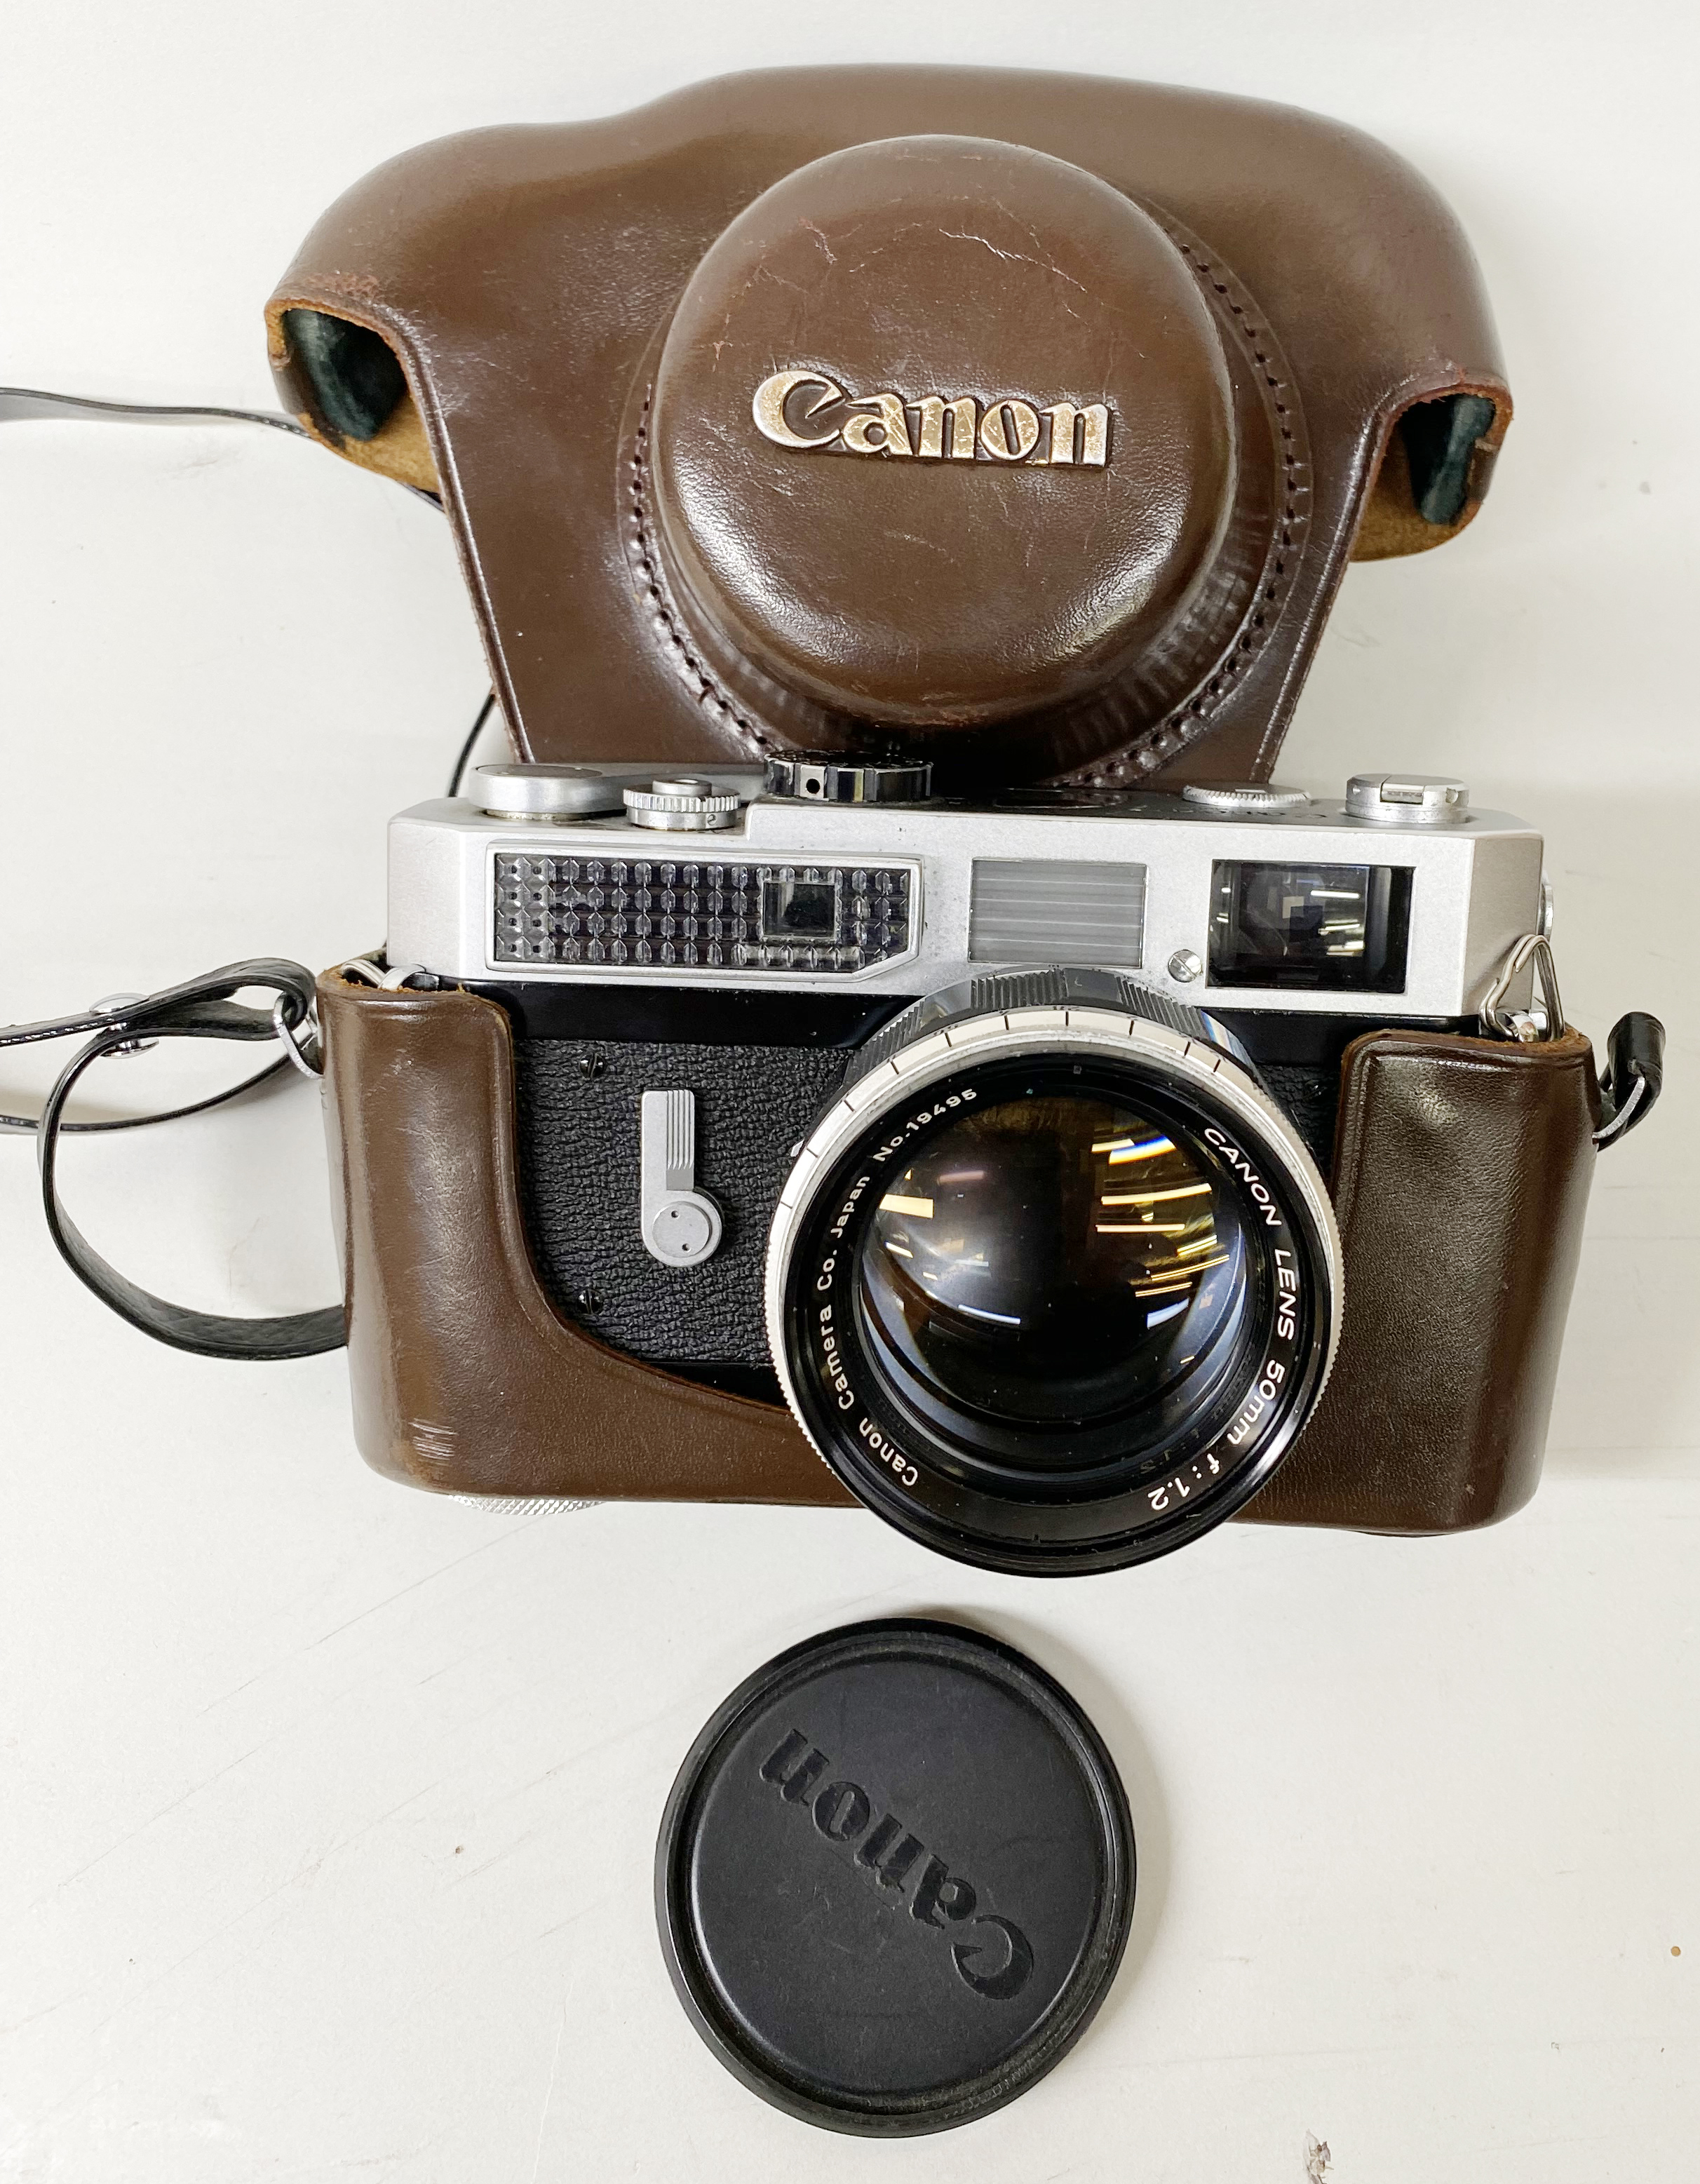 Canon 7 Camera Serial No:916114 Lens: 50mm Canon Accessories: Leather Case + Auto-Up Close Up - Image 2 of 3